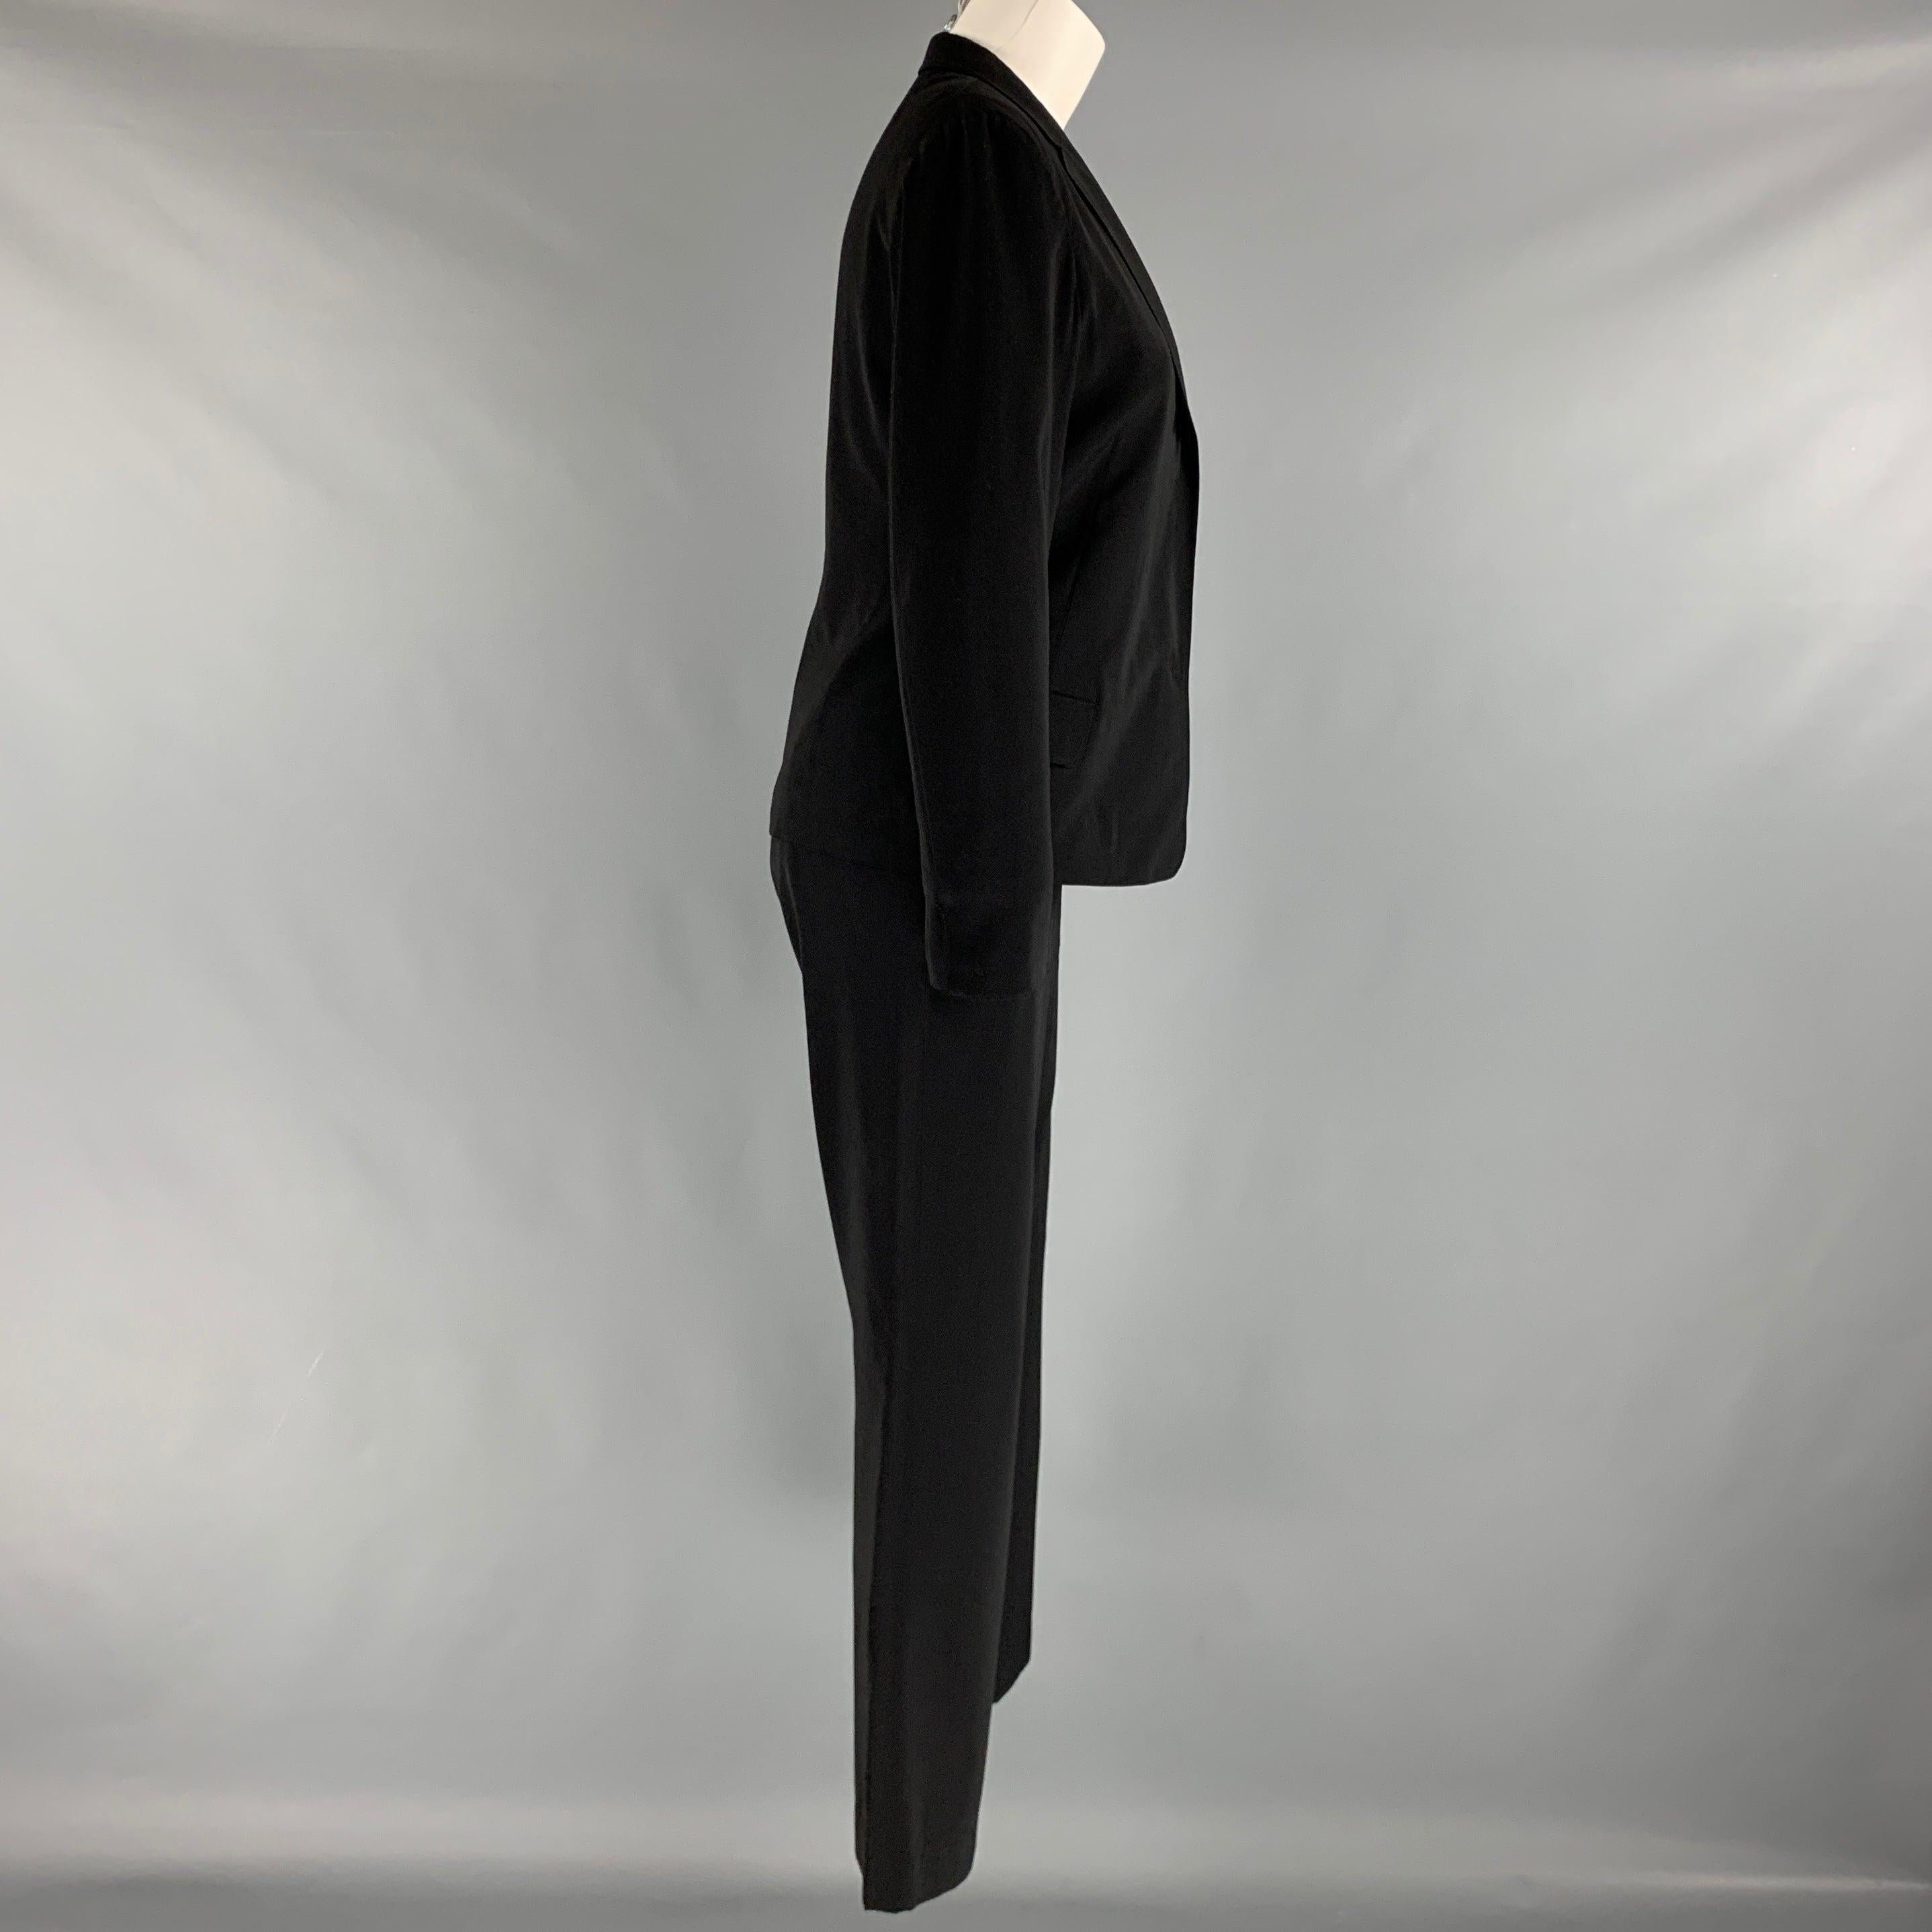 JIL SANDER tailor made pants suit comes in a black silk woven material includes a single button, notch lapel jacket with patch and flap pockets and matching flat front high waist trousers.
 Made in Italy.Excellent Pre-Owned Condition. 

Marked:   36